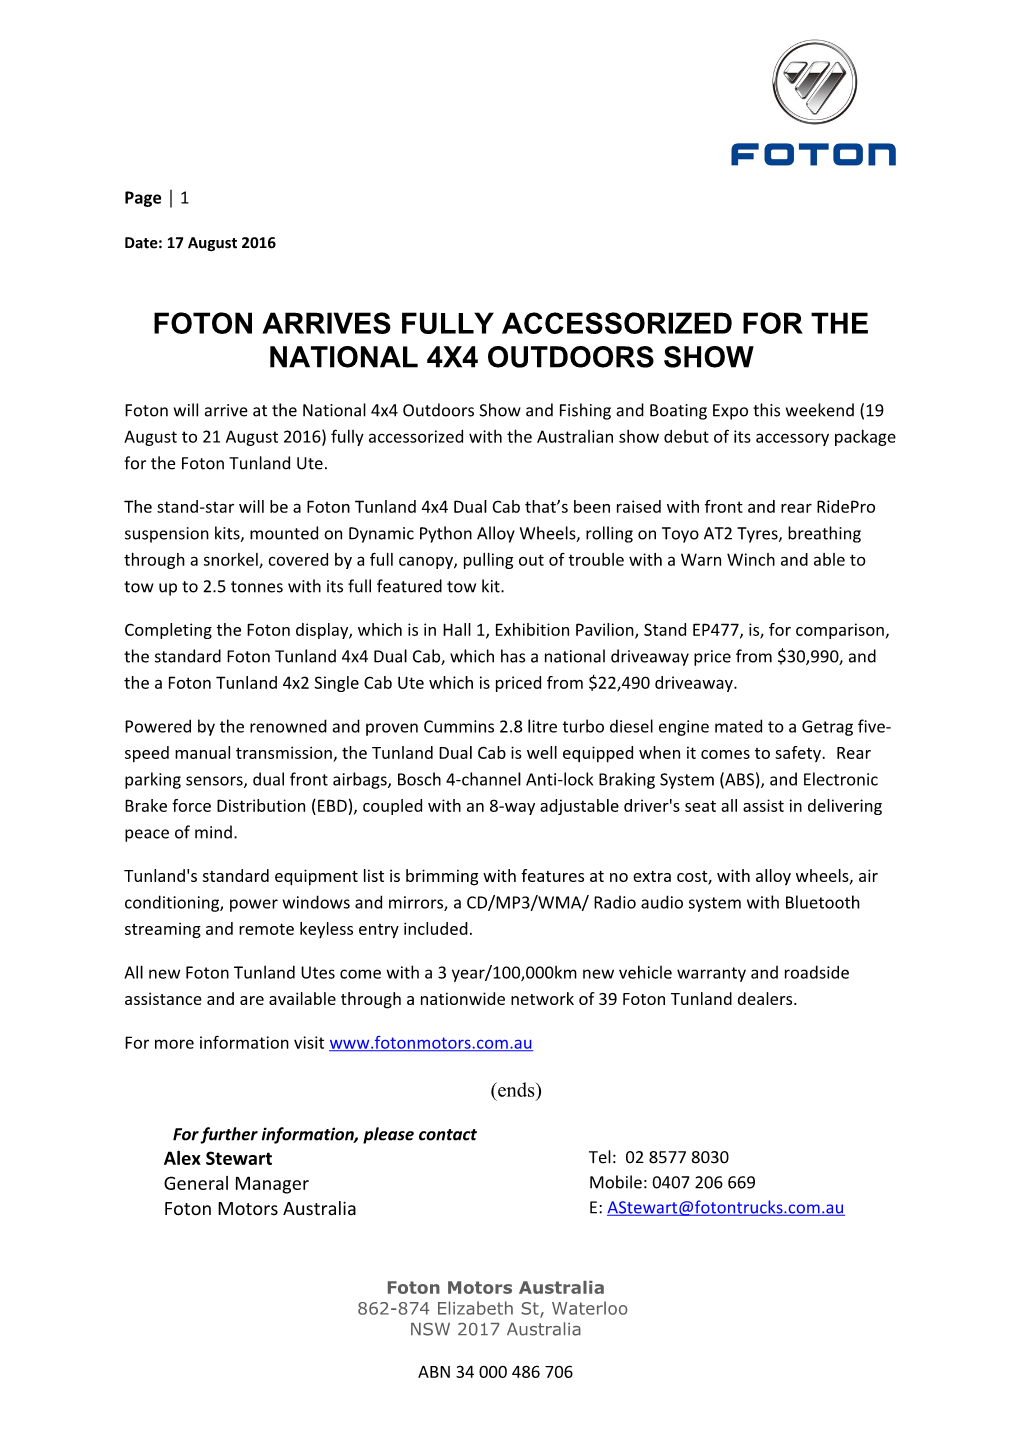 Foton Arrives Fully Accessorized for the National 4X4 Outdoors Show